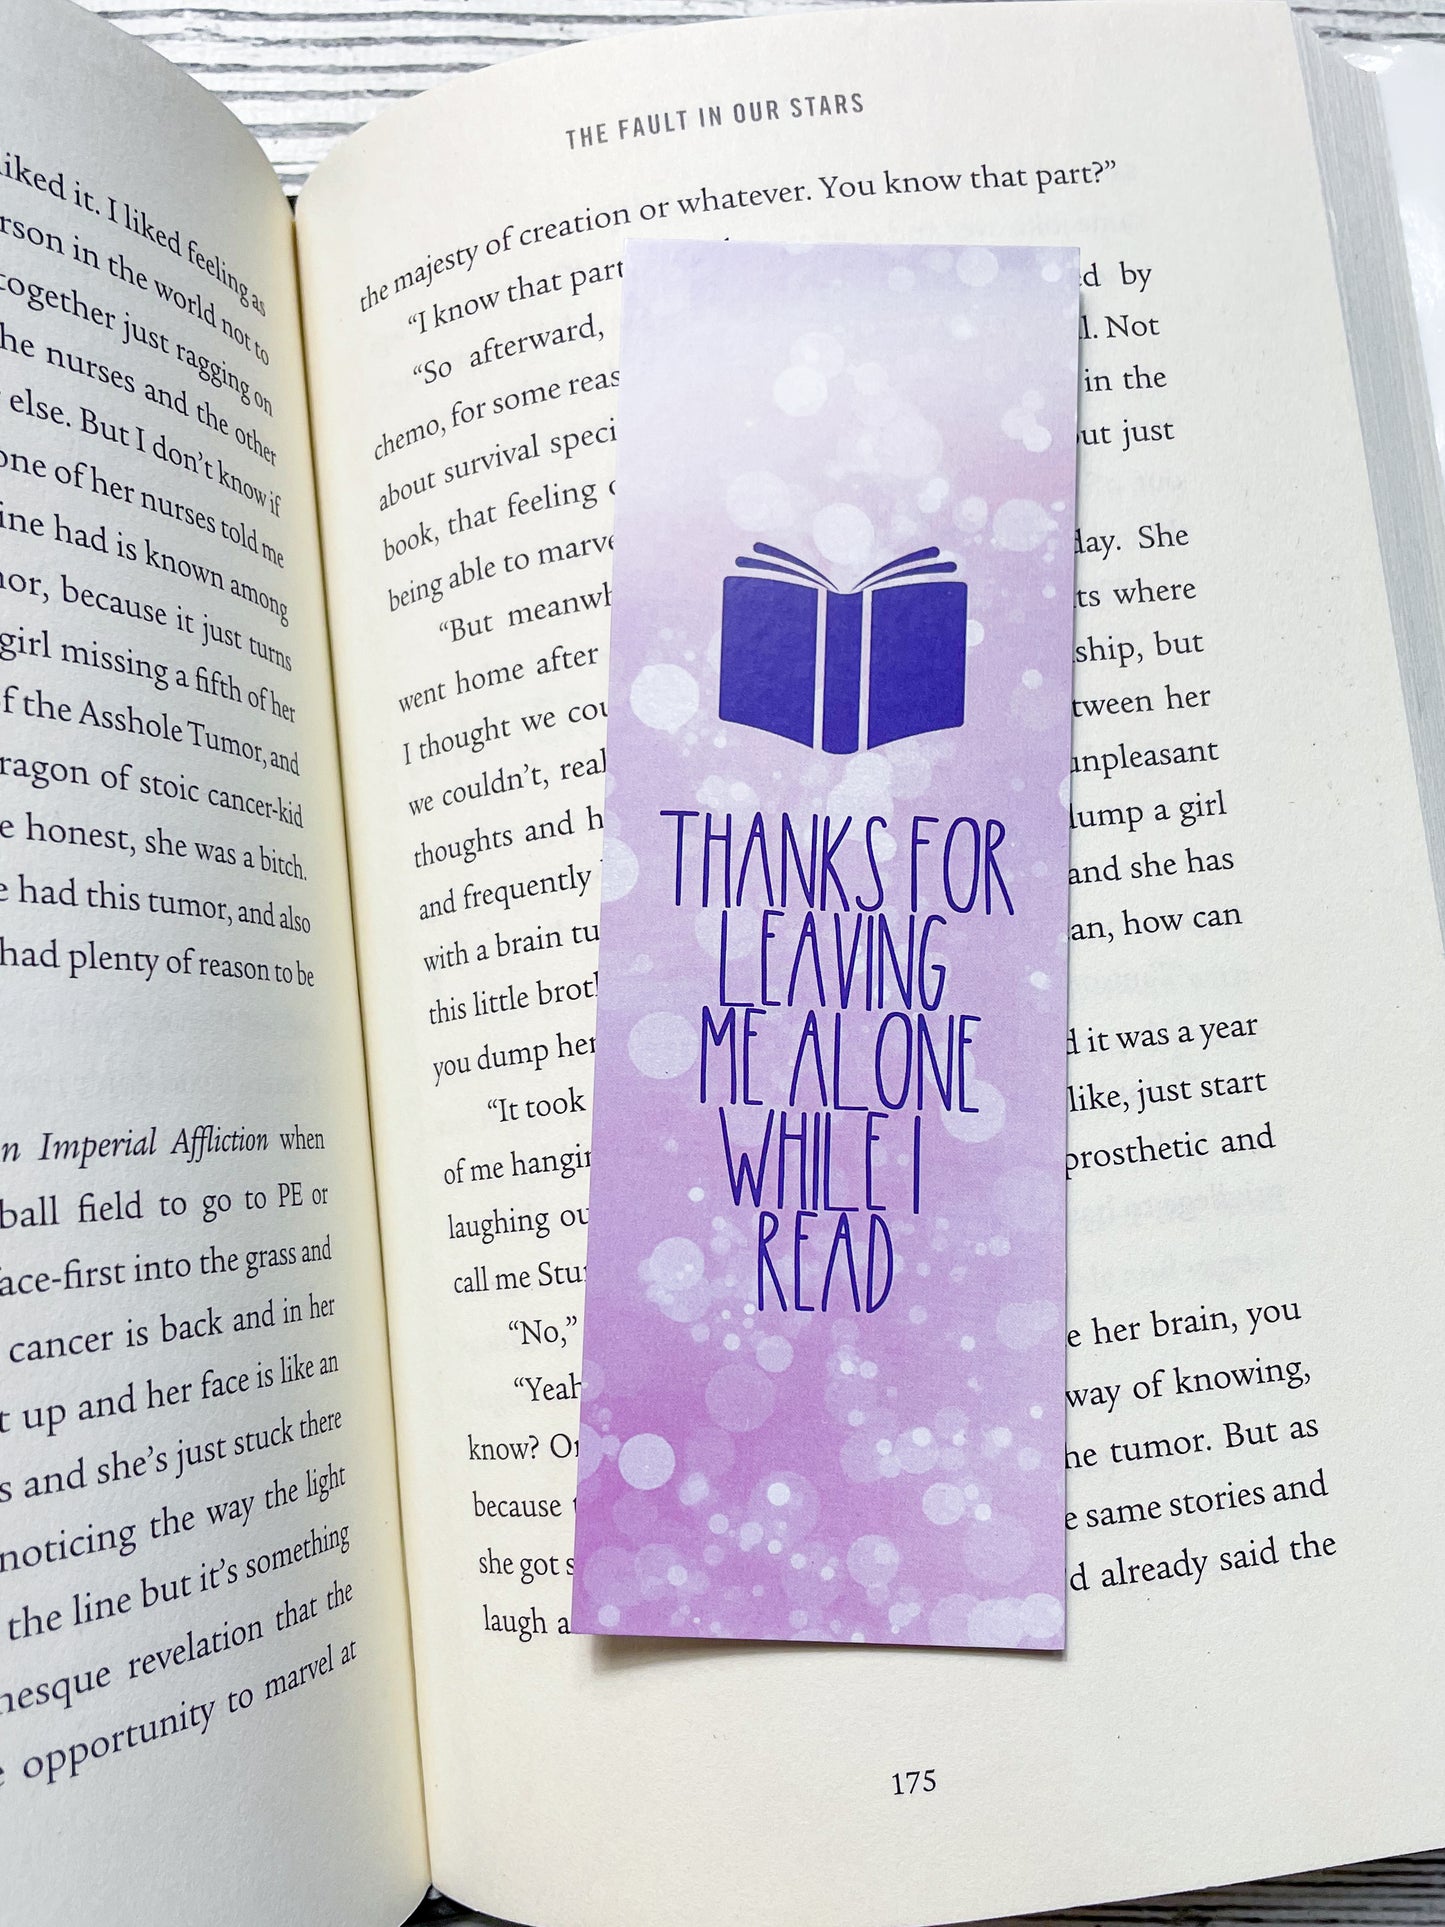 Thanks for Leaving Me Alone While I Read Purple Bookmark